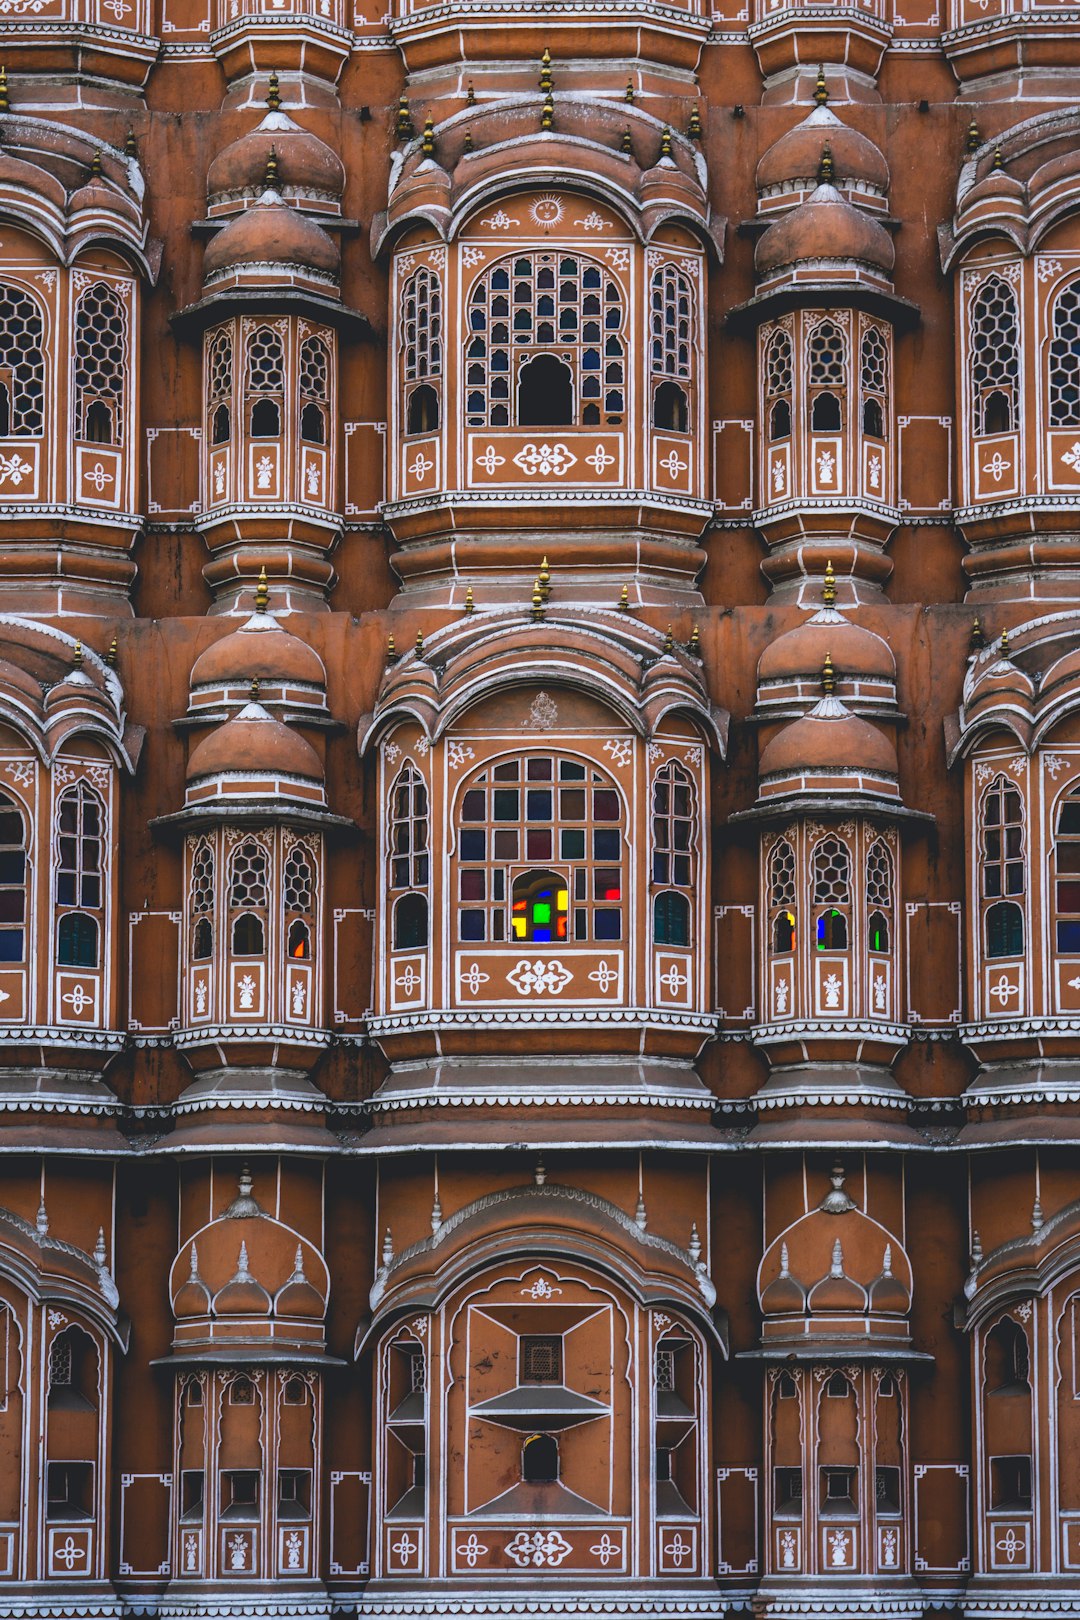 Travel Tips and Stories of Hawa Mahal in India